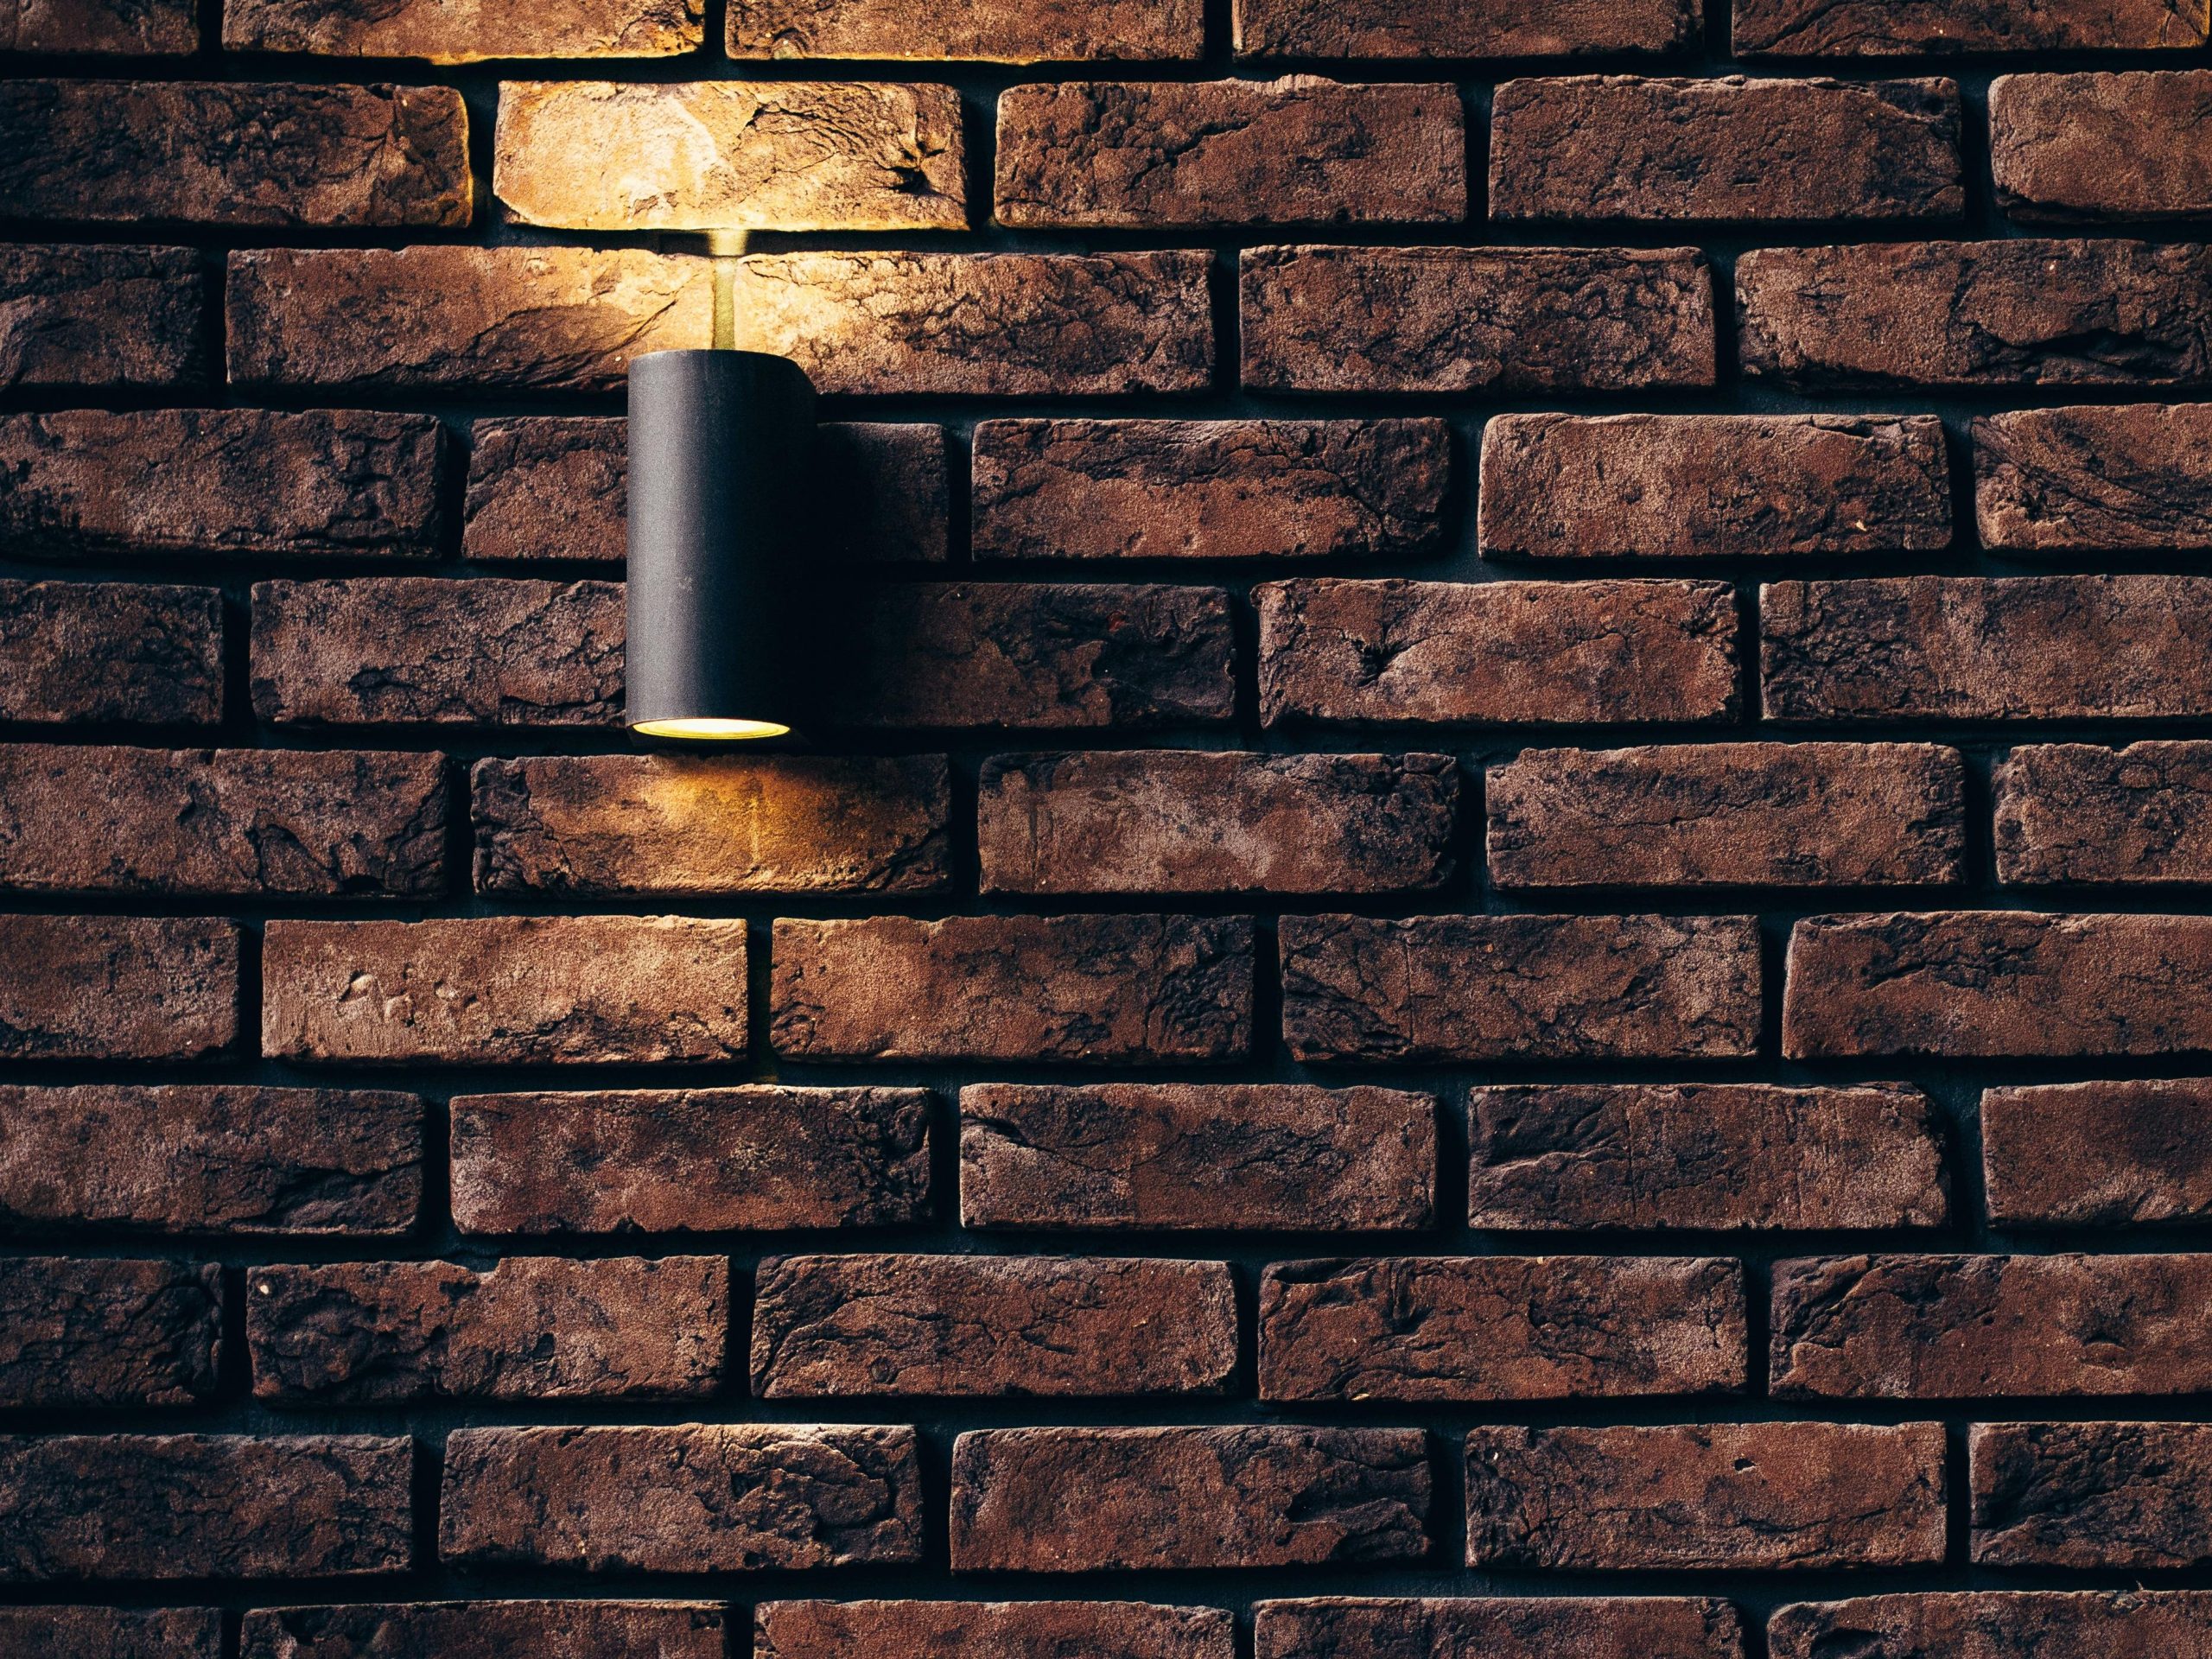 How to Light Up Your Wall Without Wiring